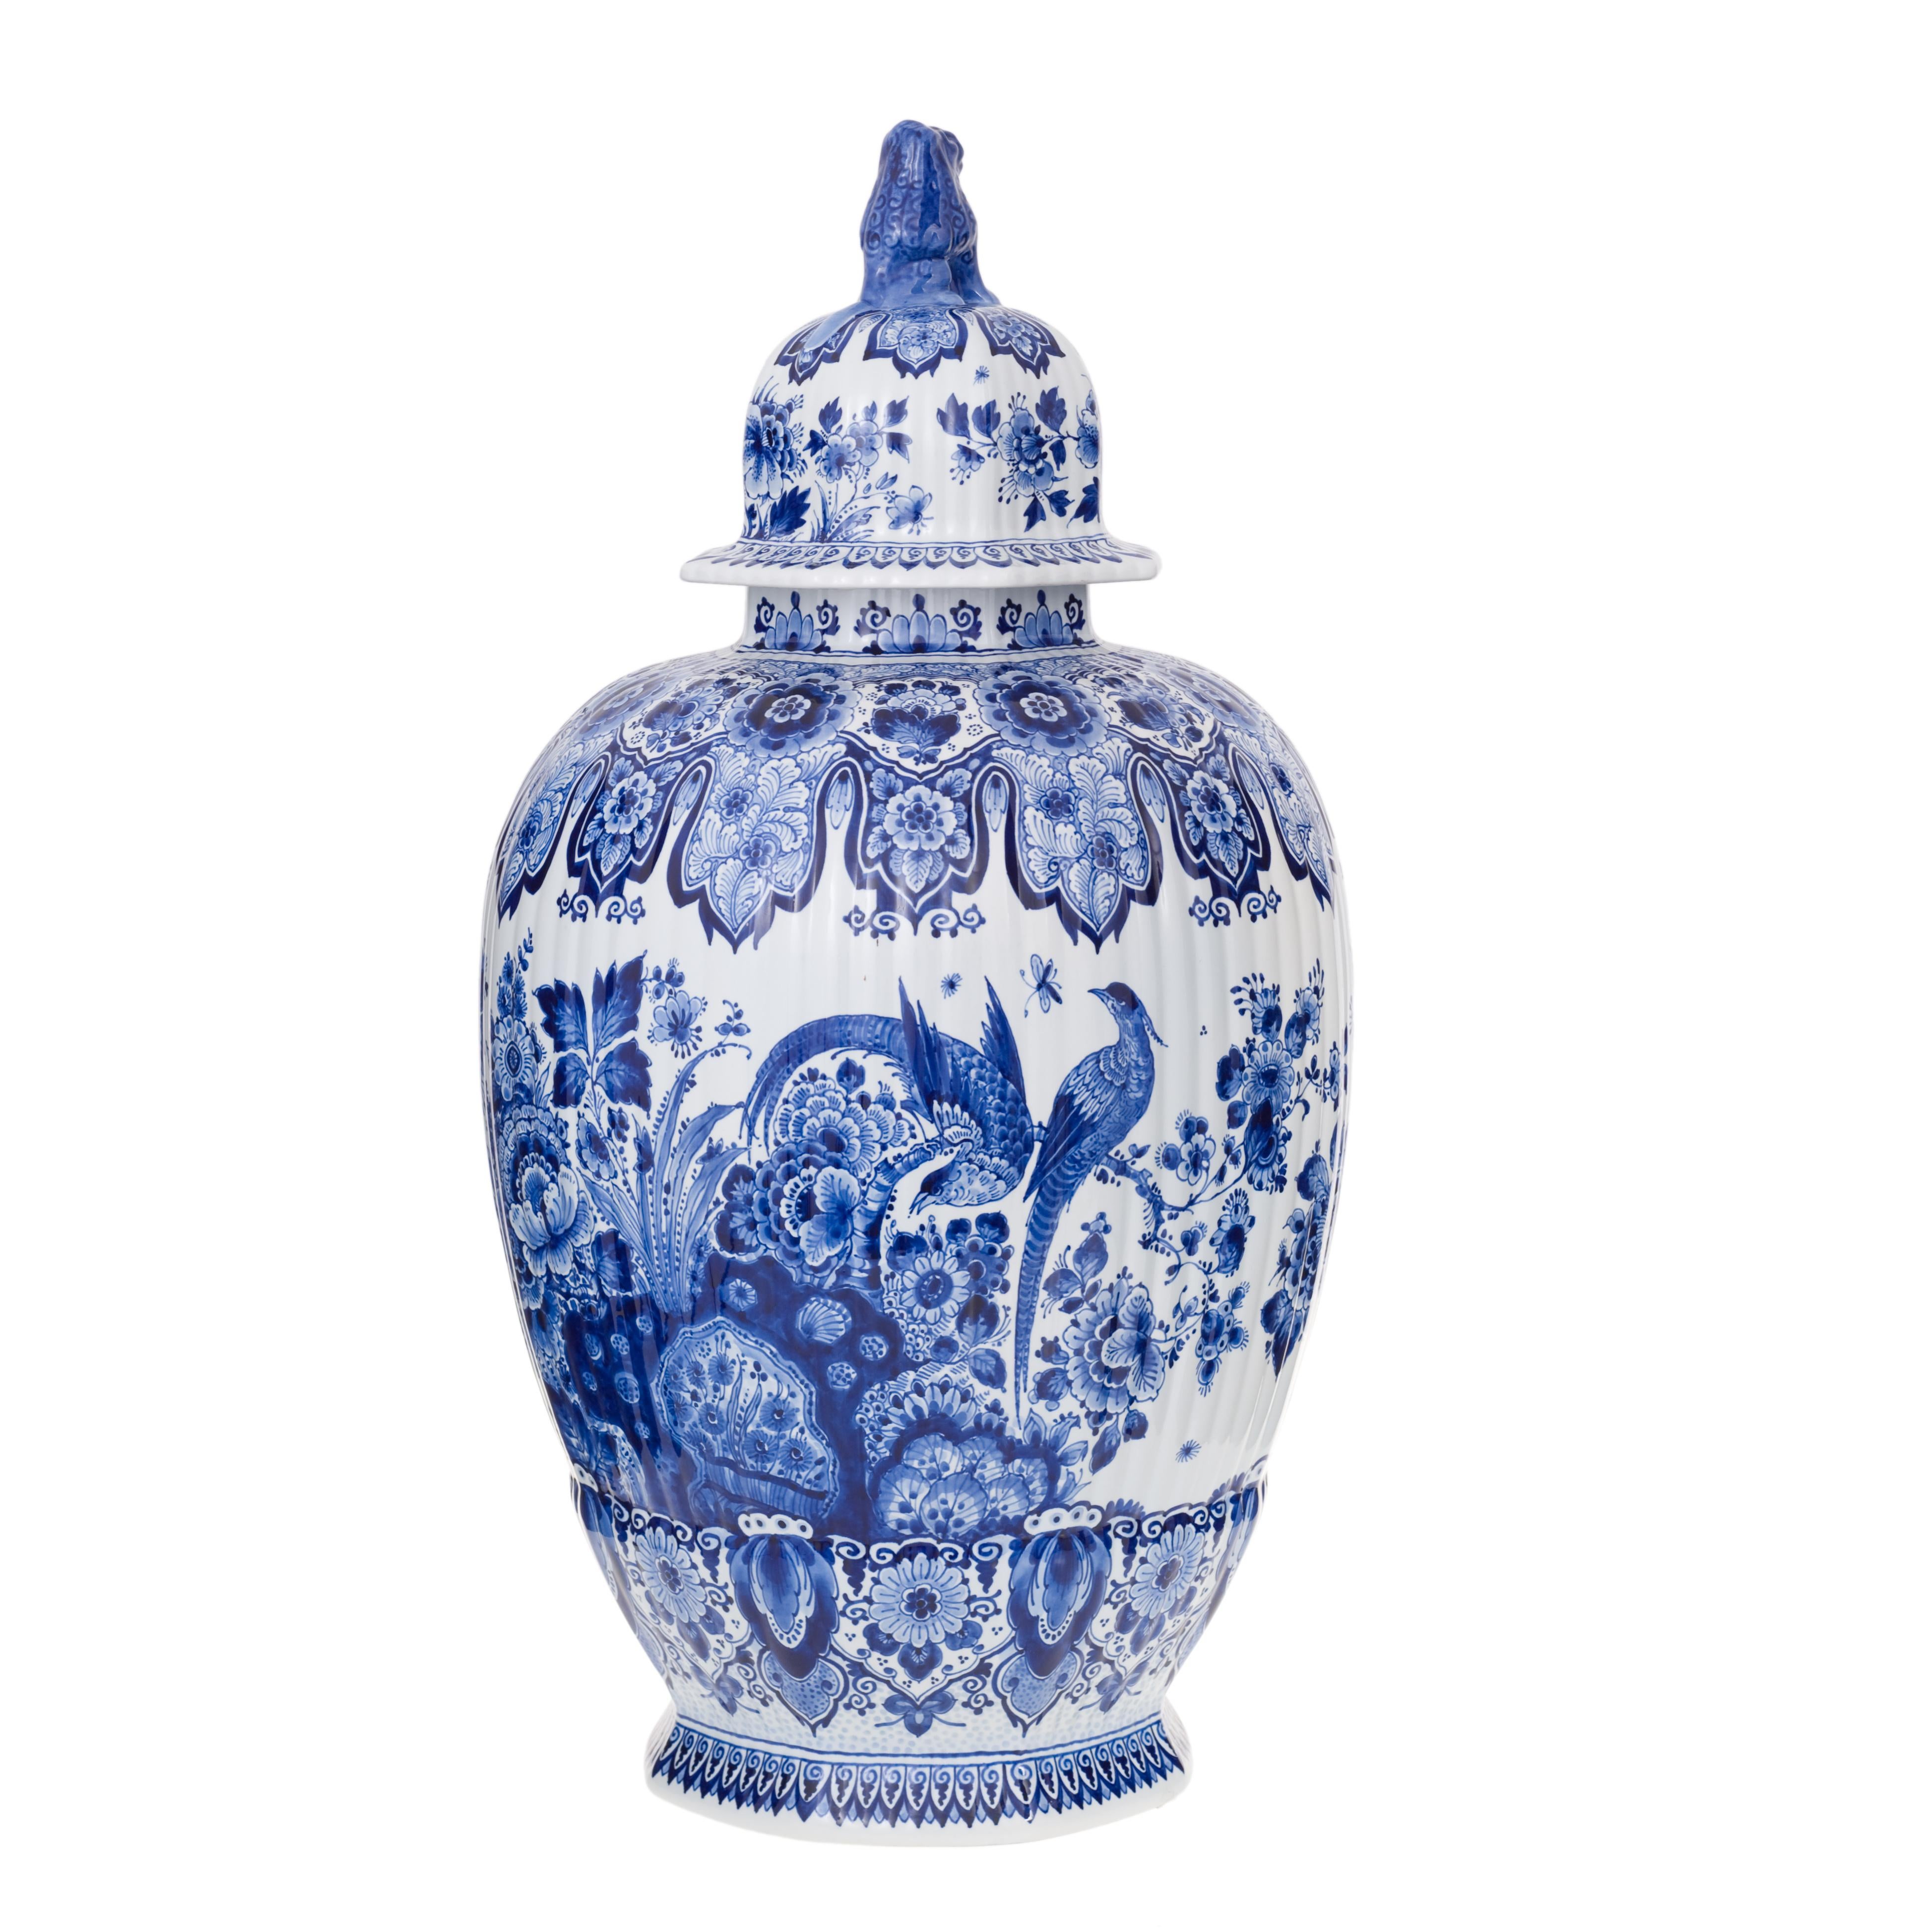 Hand-painted vase richly decorated with floral and birds motif in original Delft Blue colour. This is an example of a purely decorative piece. The whole surface of the jar is a balanced decoration hand-painted with a continuous depiction. A